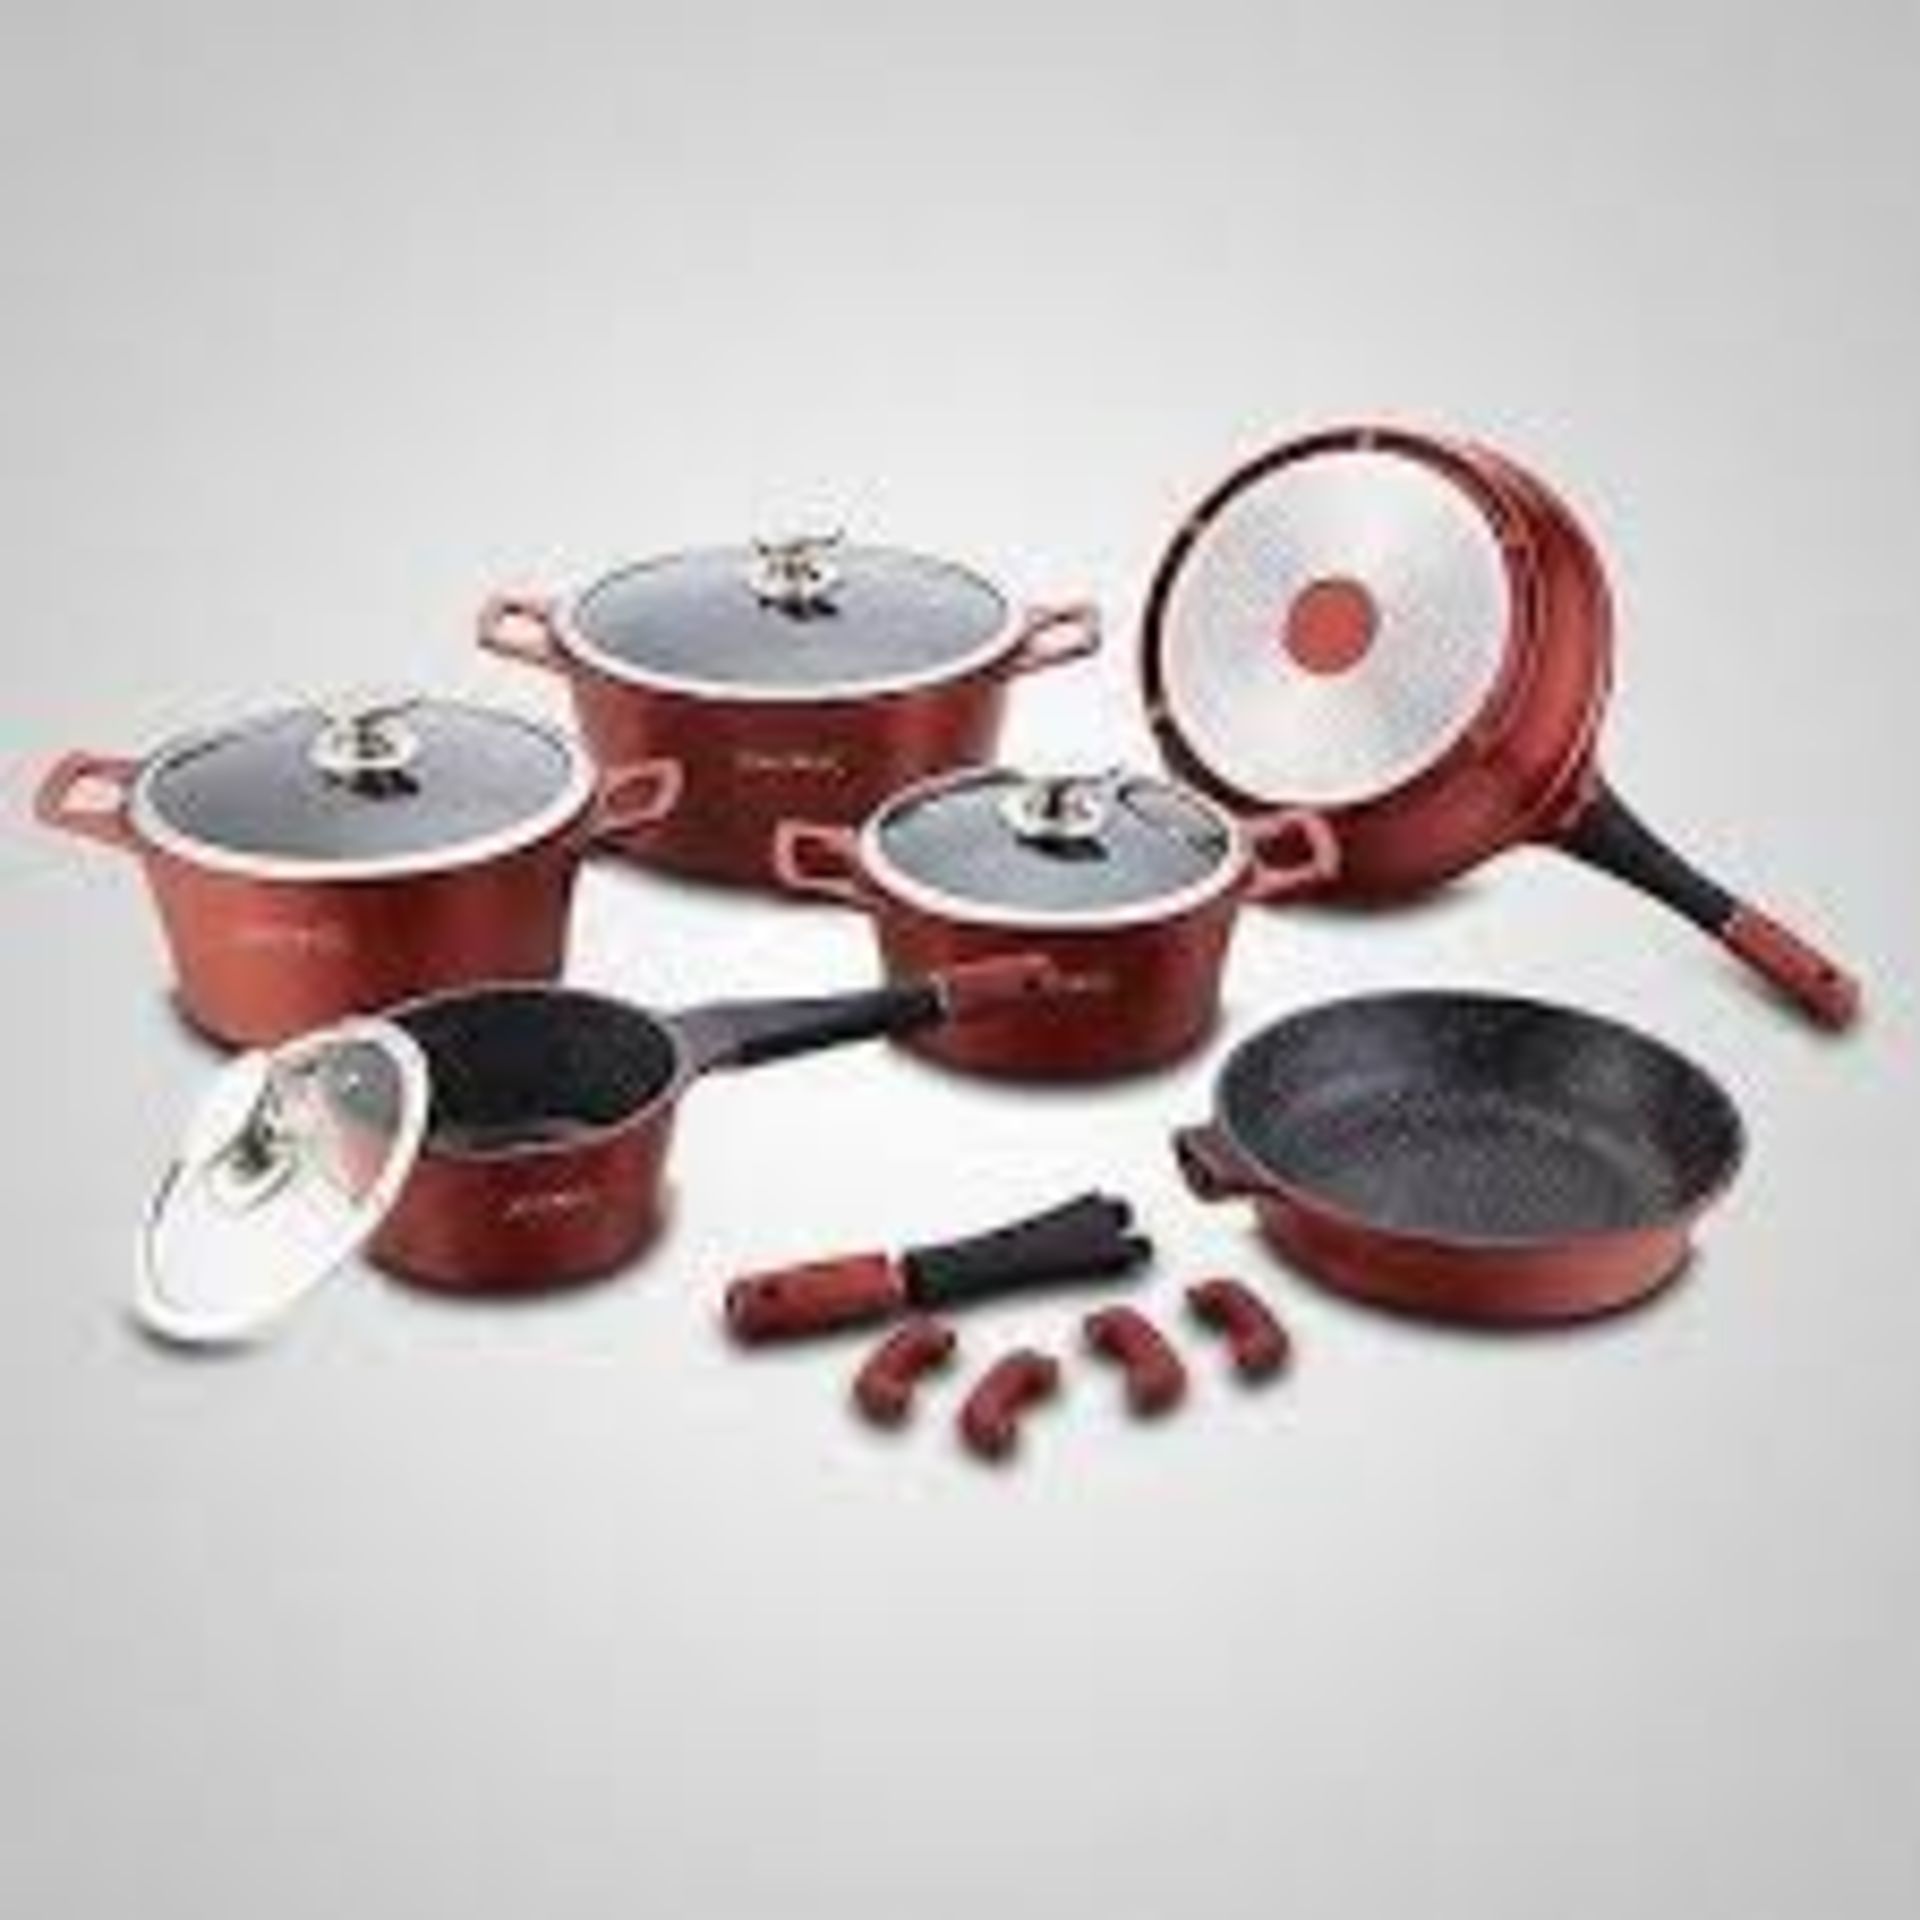 V Brand New Ten Piece Forged Marble Saucepan Set Including Two Frying Pans-Stock Pots ETC X 2 YOUR